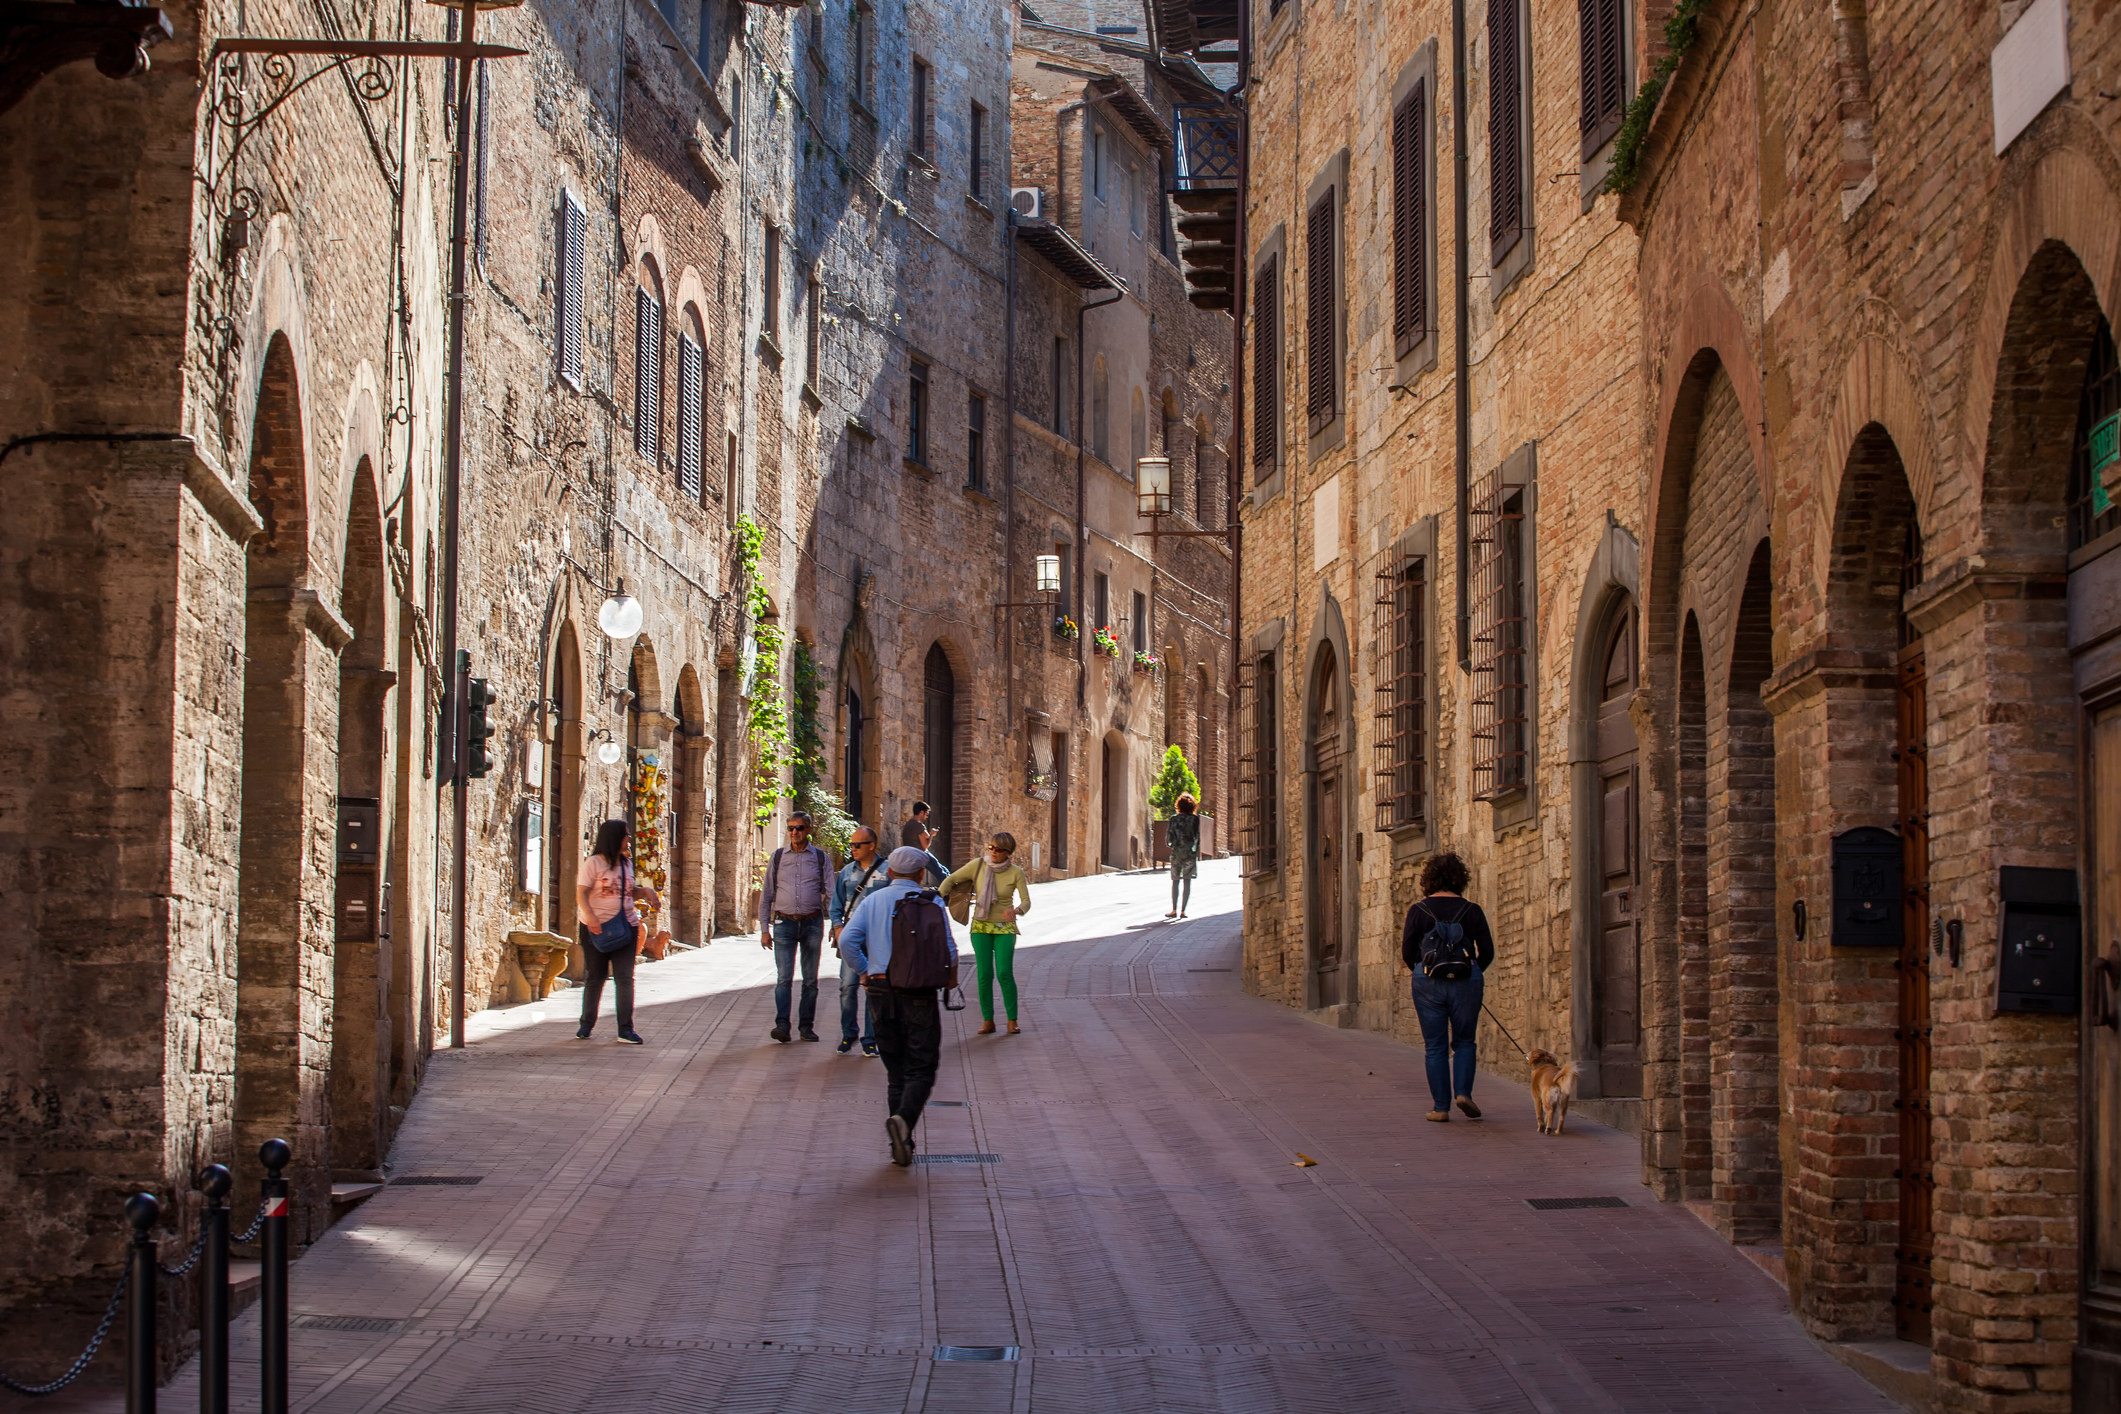 People strolling in a narrow medieval town